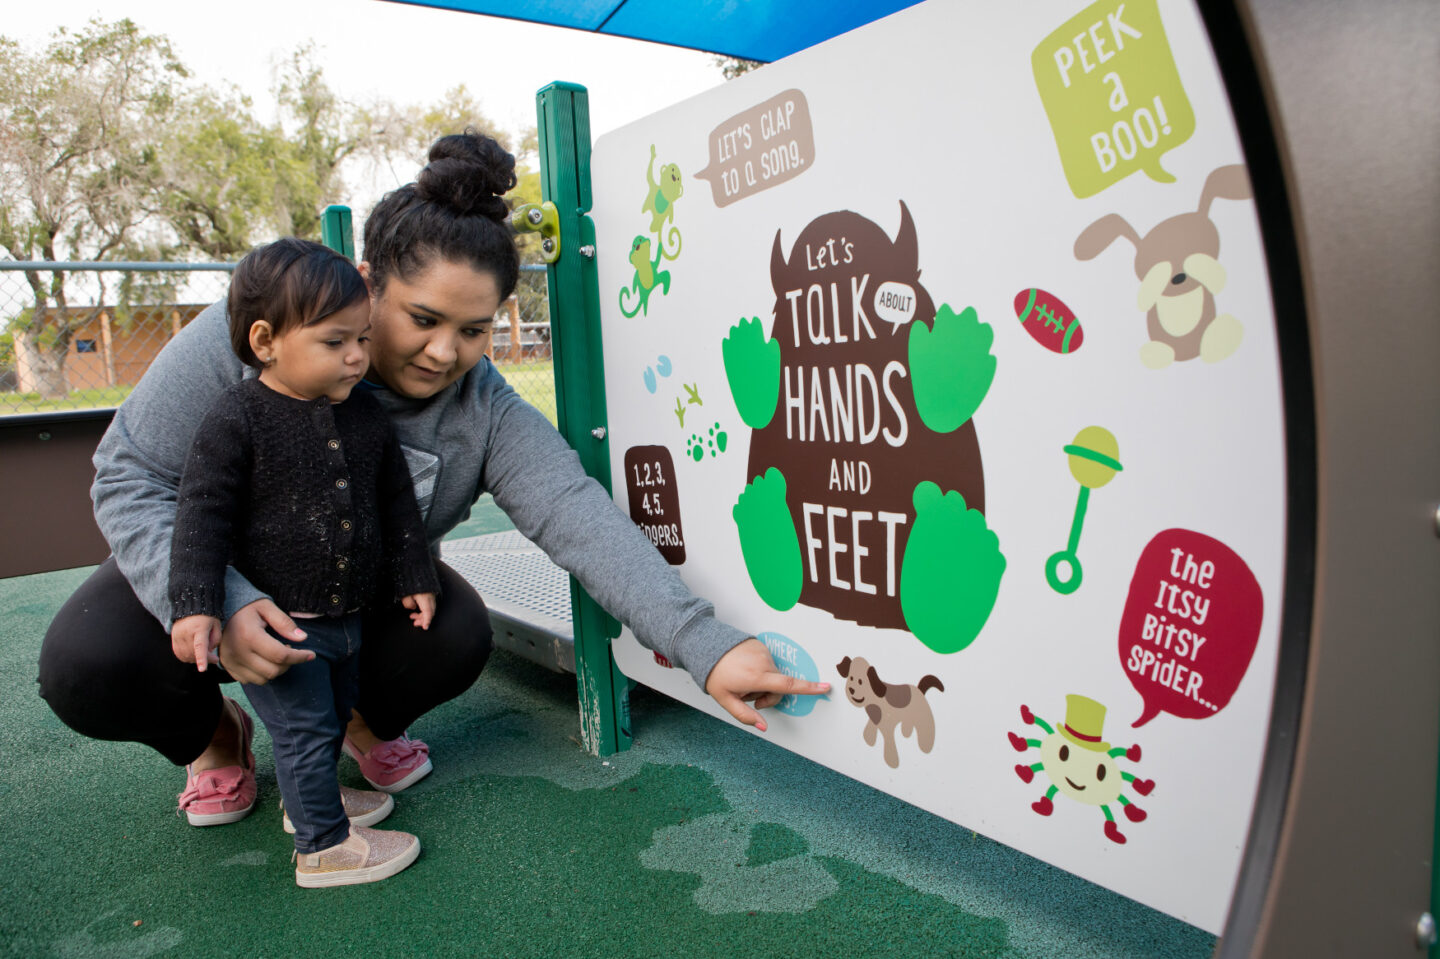 An adult and child look at a panel that says "Let's talk about hands and feet" and which contains various illustrations and prompts for reading and talking